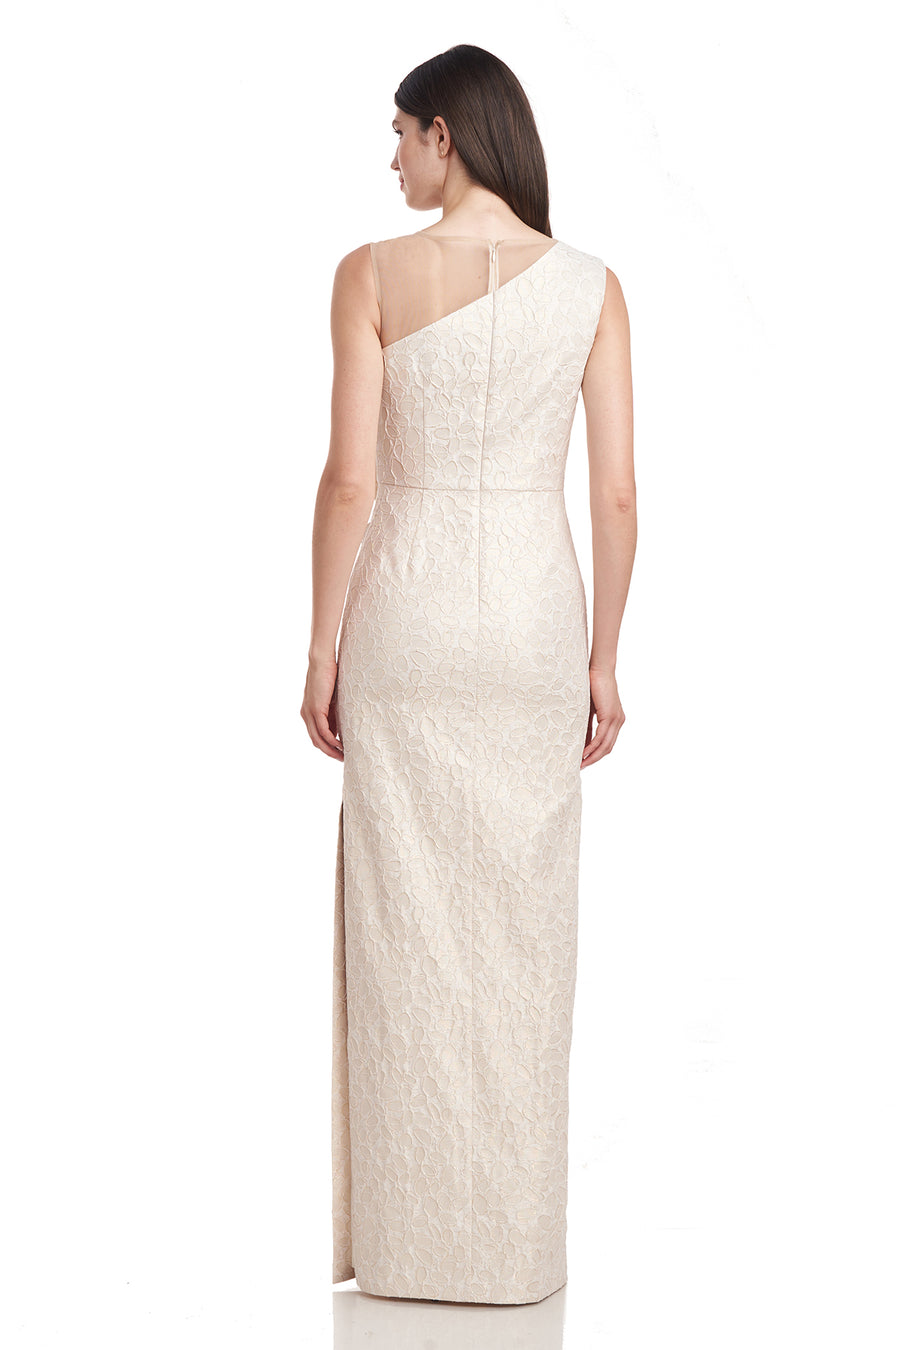 Odette Gown